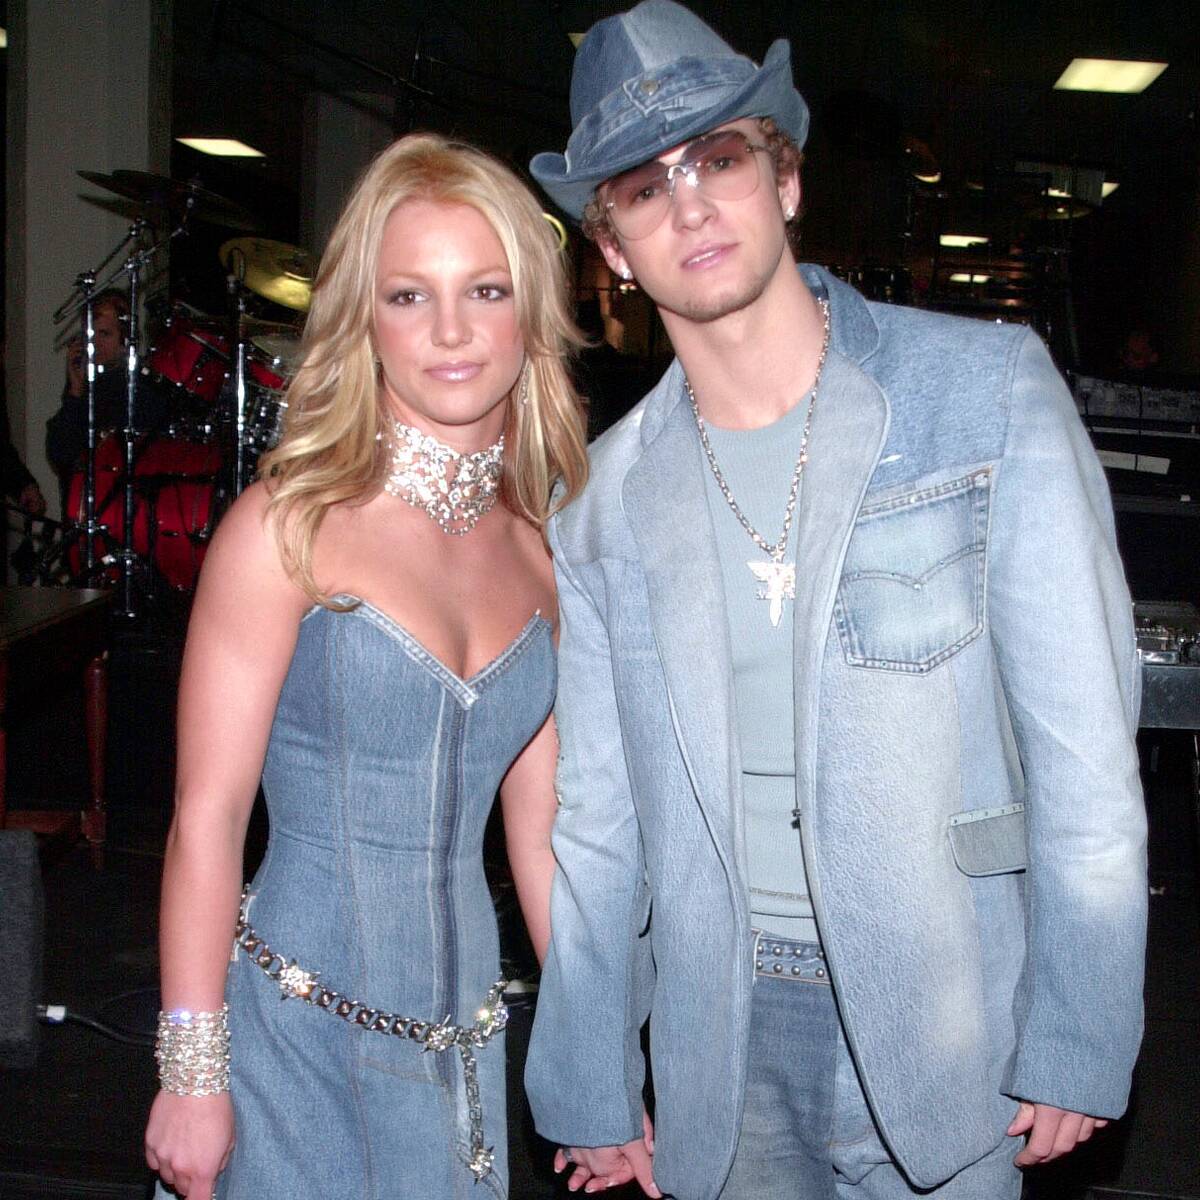 Justin Timberlake Reacts to the Internet’s Obsession With His and Britney Spears’ Icon Denim Looks